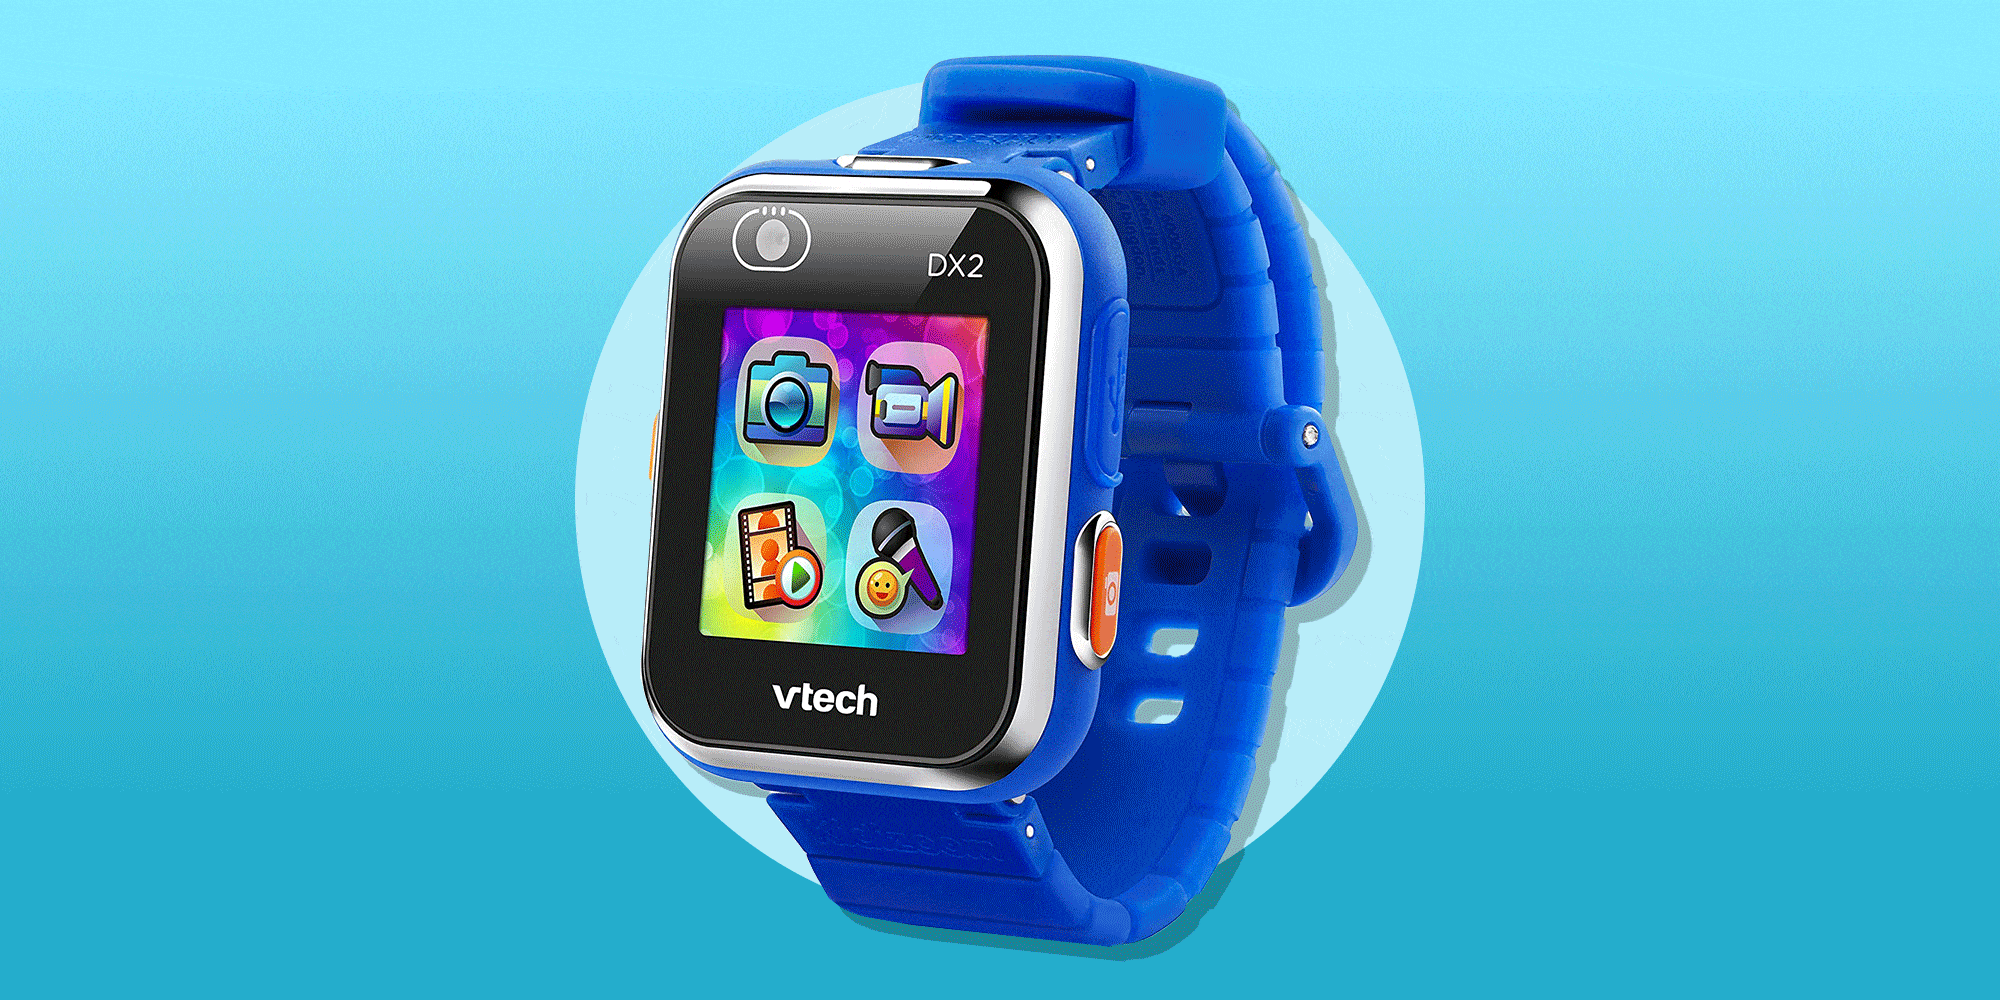 best-smartwatch-for-a-10-year-old-sale-price-save-41-jlcatj-gob-mx